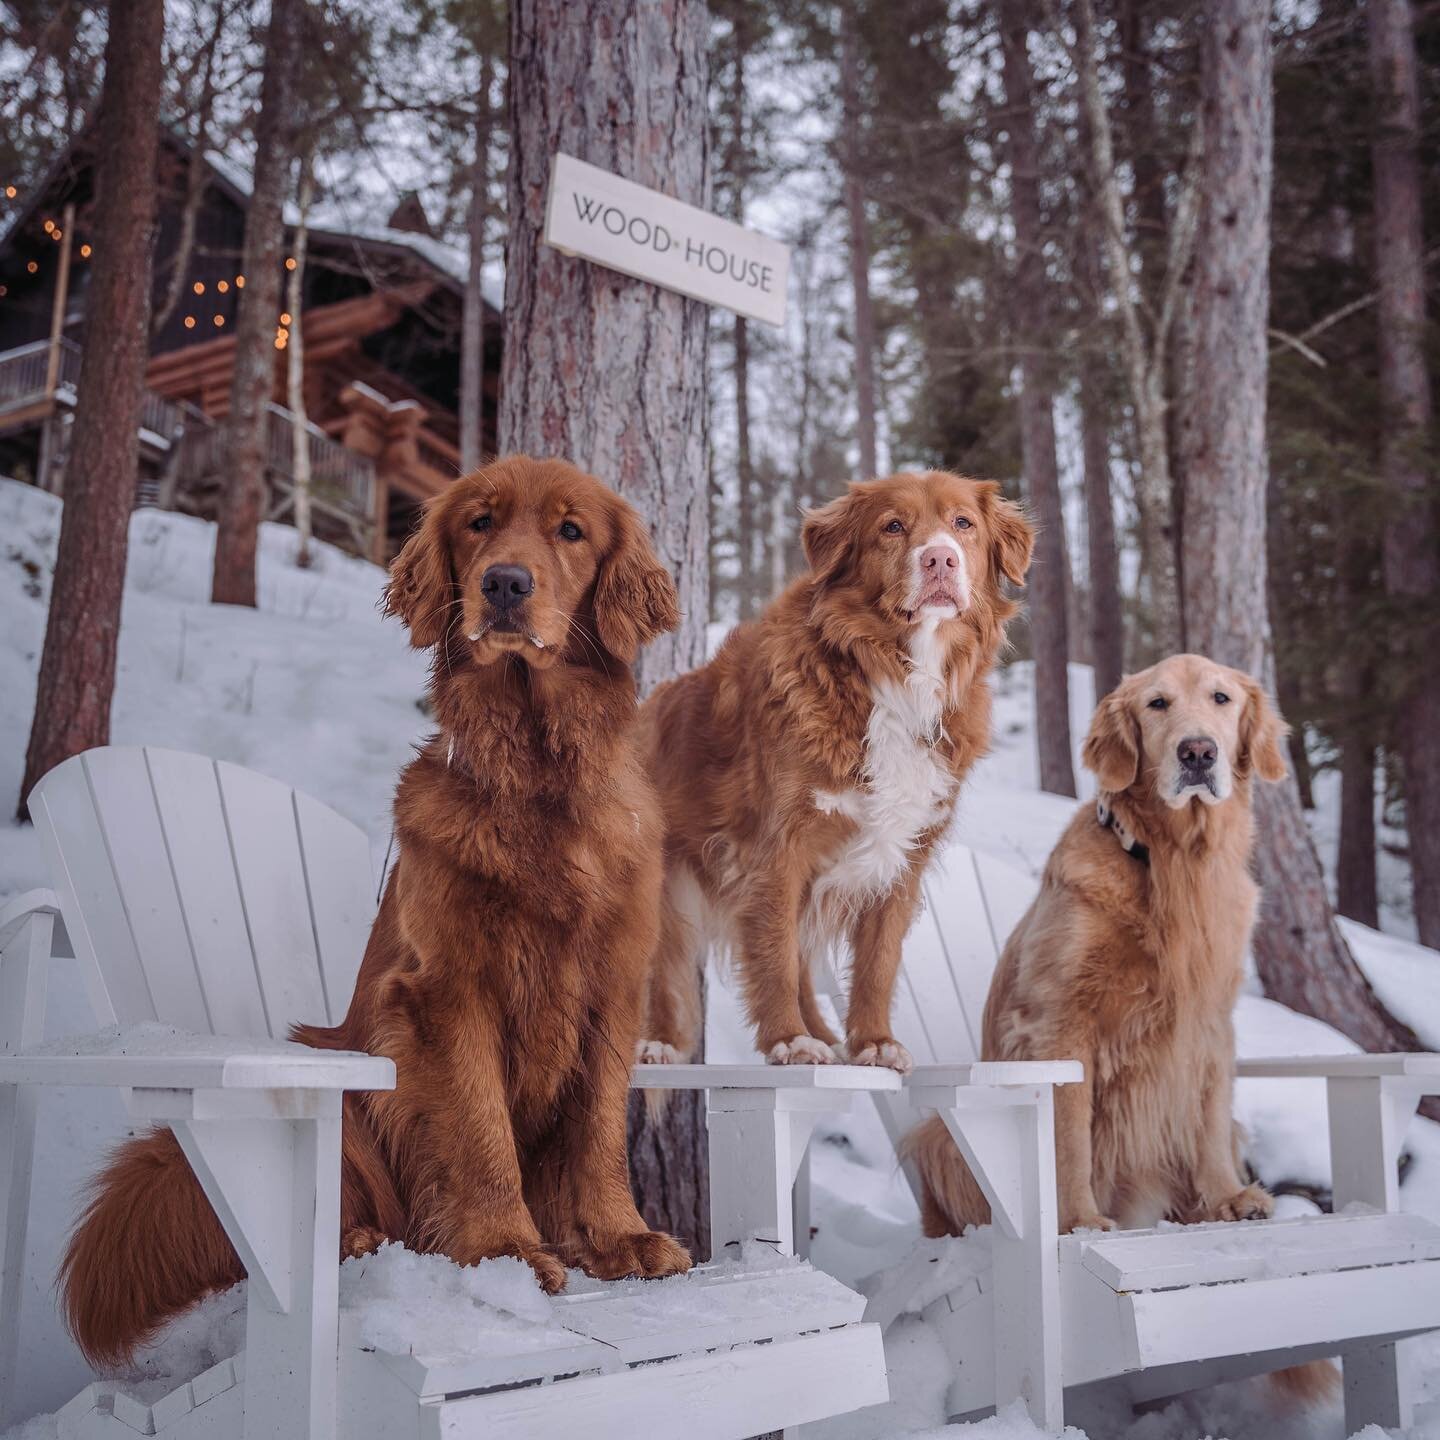 Snow flurries with our furry pals. ❄️ 🐾 p.s. this is a dog account now.⁠
⁠
📸 by @thewoodhousemuskoka